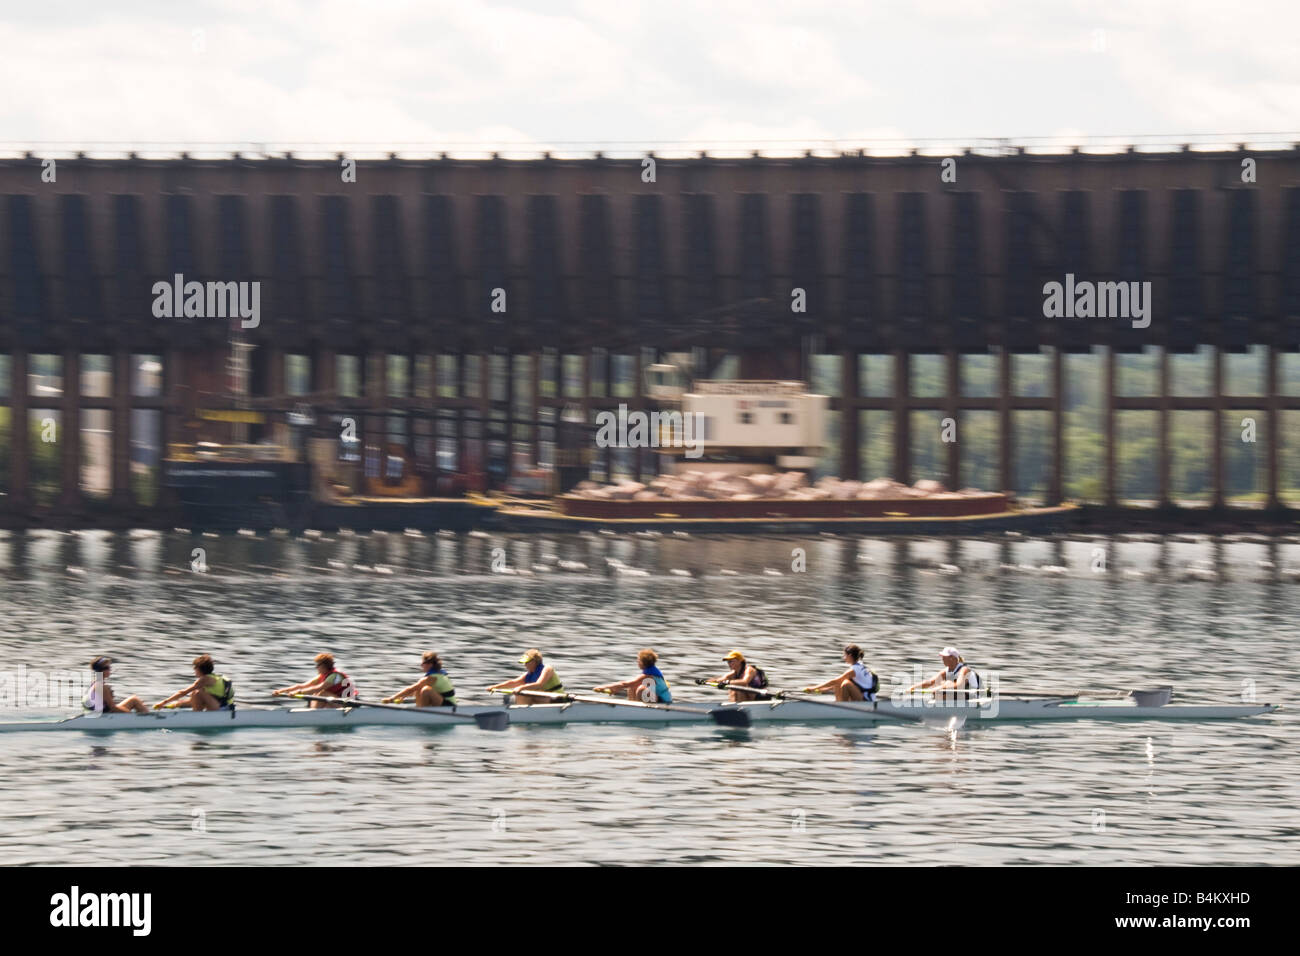 Rowing in the lower harbor of Marquette Michigan on Lake Superior Stock Photo